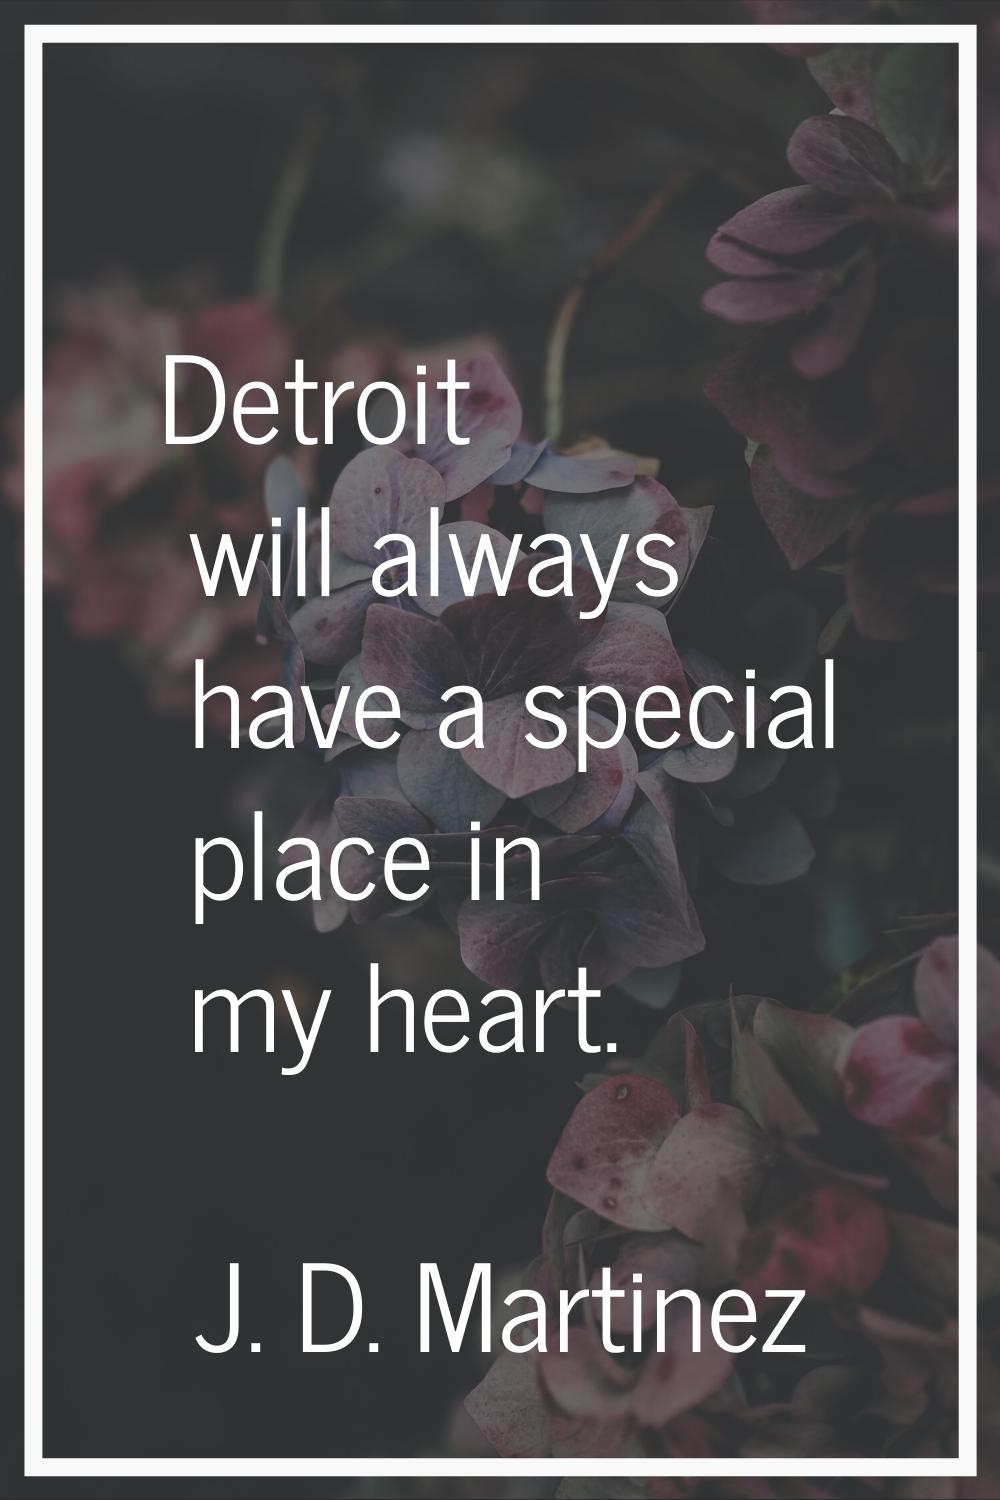 Detroit will always have a special place in my heart.